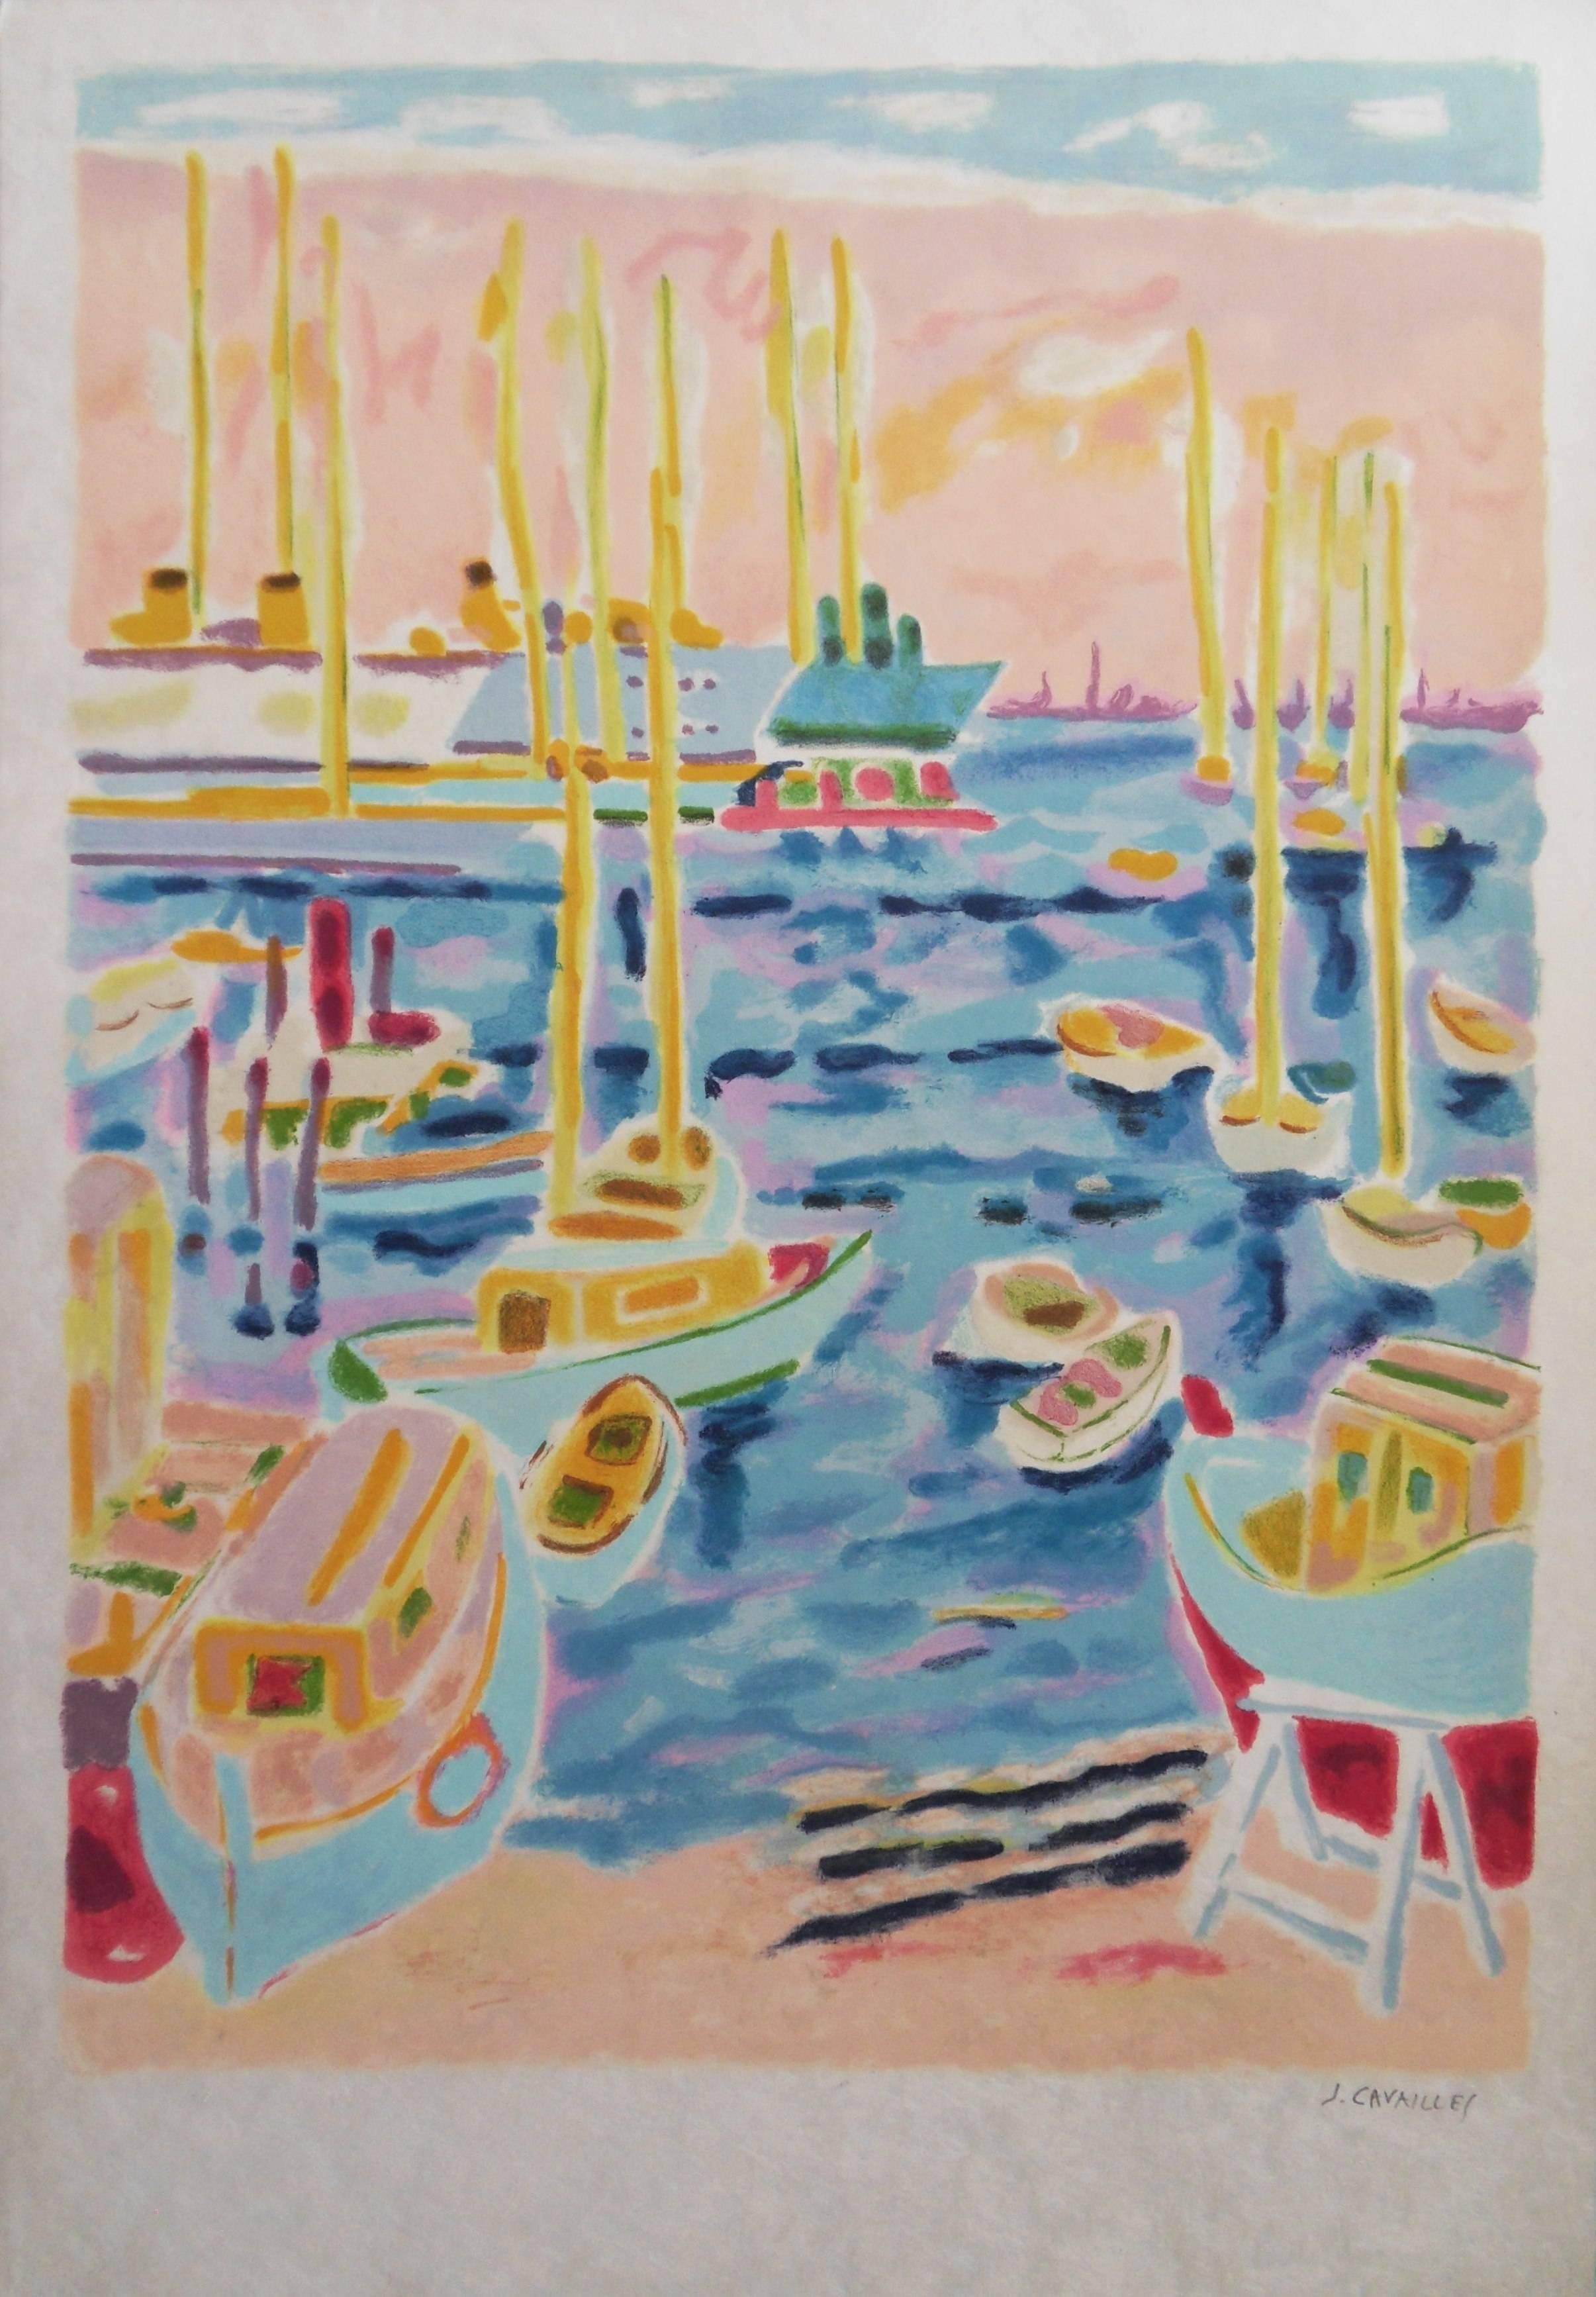 Jules CAVAILLES
Cannes Harbour (Le port de Cannes)

Original lithograph
Handsigned in pencil
Annotated EA (Artist Proof aside the 100 copies edition) 
On Japan paper 76 x 52 cm (c. 30 x 21 in)

Excellent condition